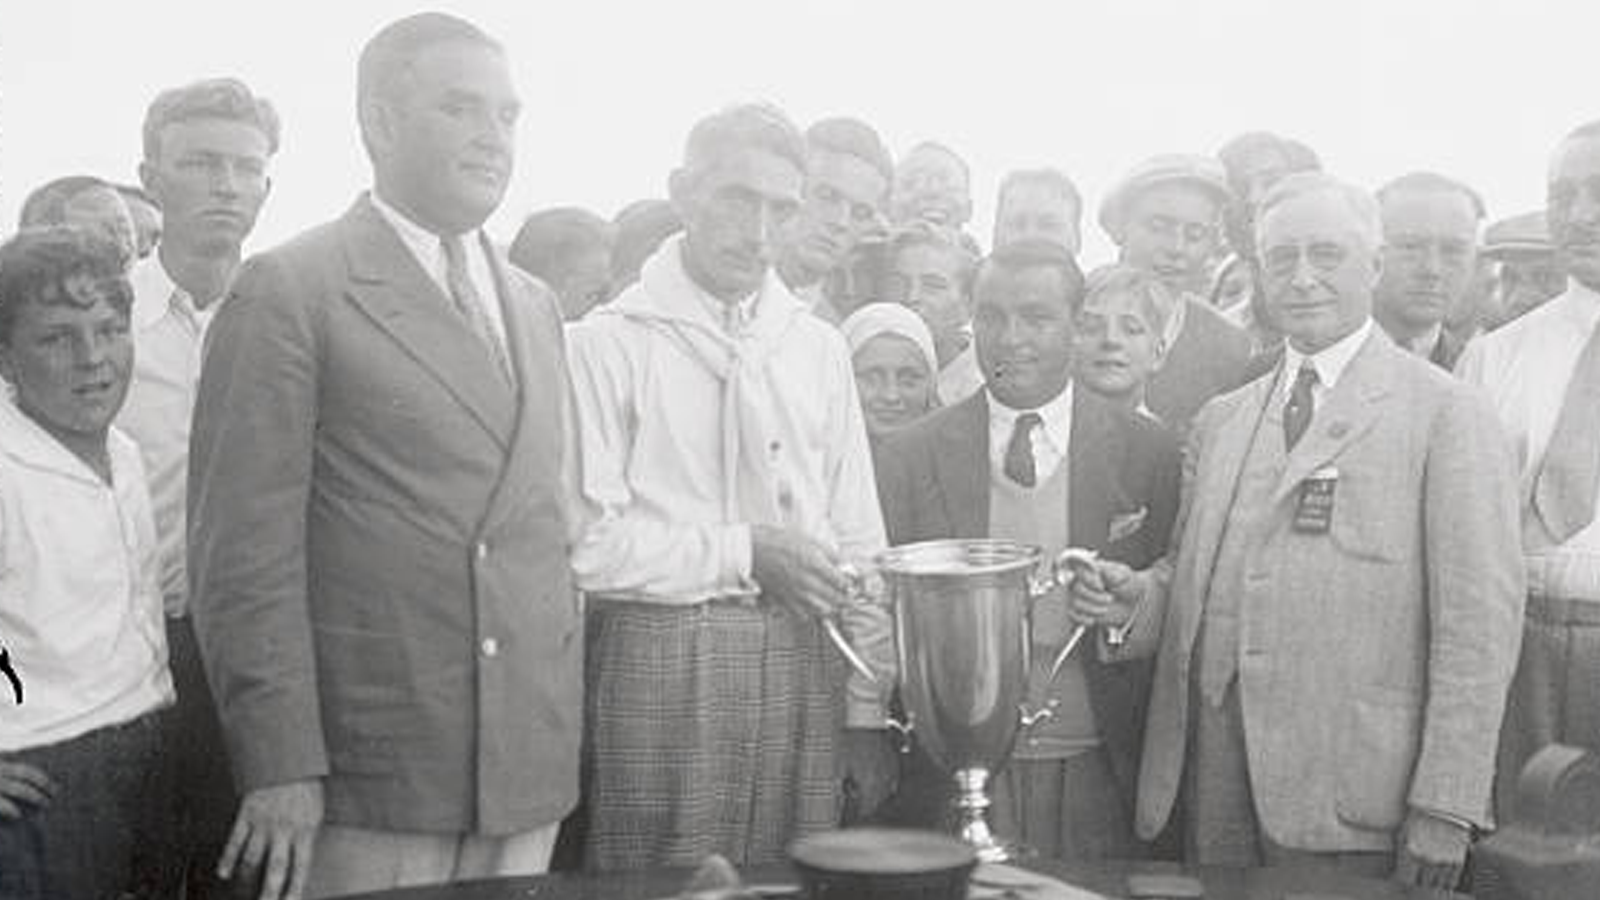 Left to right: Benjamin Ribman, President of Fresh Meadow, Tommy Armour, Champion, Gene Sarazen, Runner-Up, Albert Gates, PGA Business Manager, and the Perpetual Championship Cup.